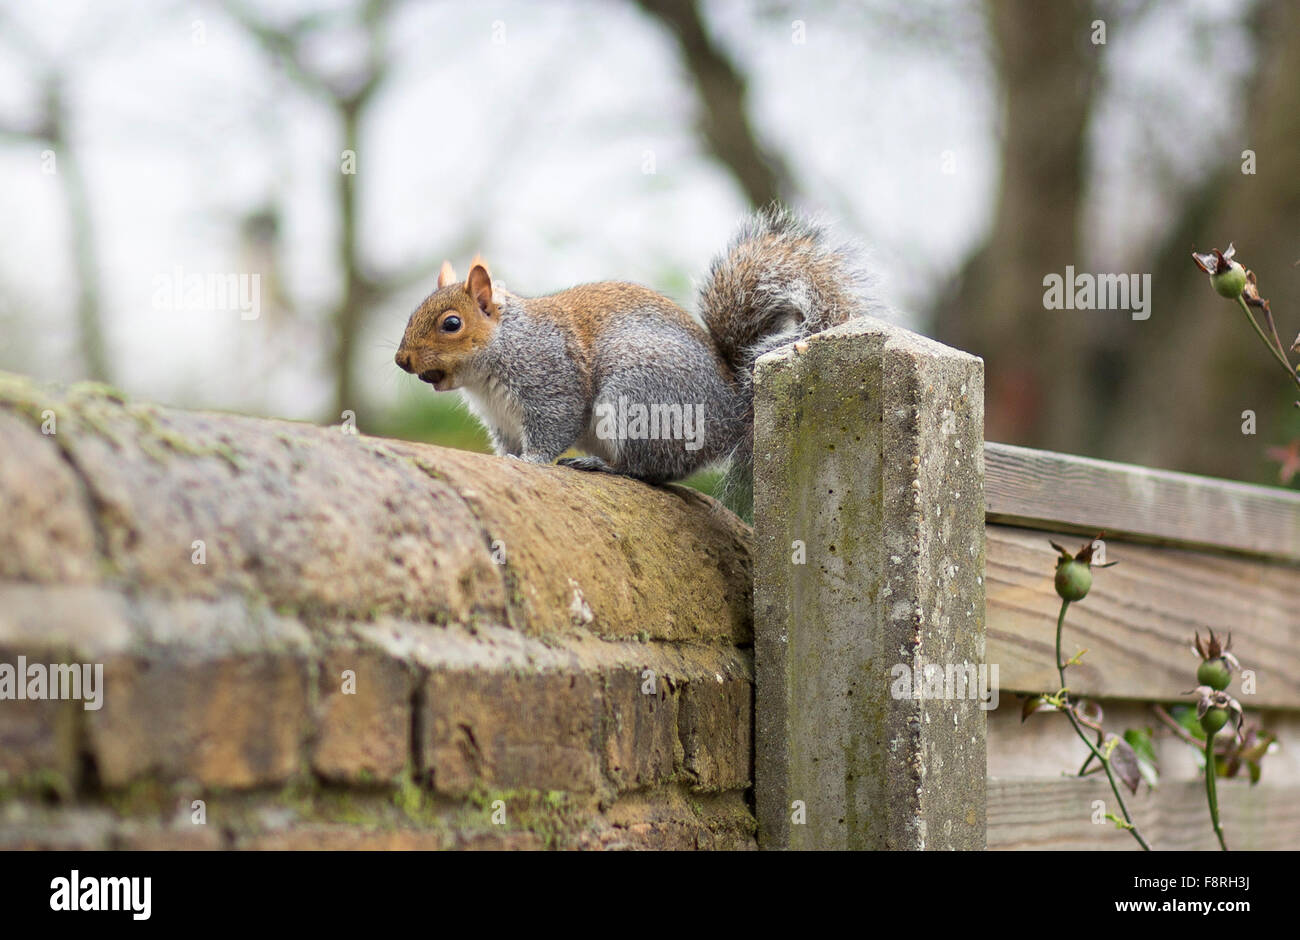 squirrel with nut in mouth on garden wall Stock Photo